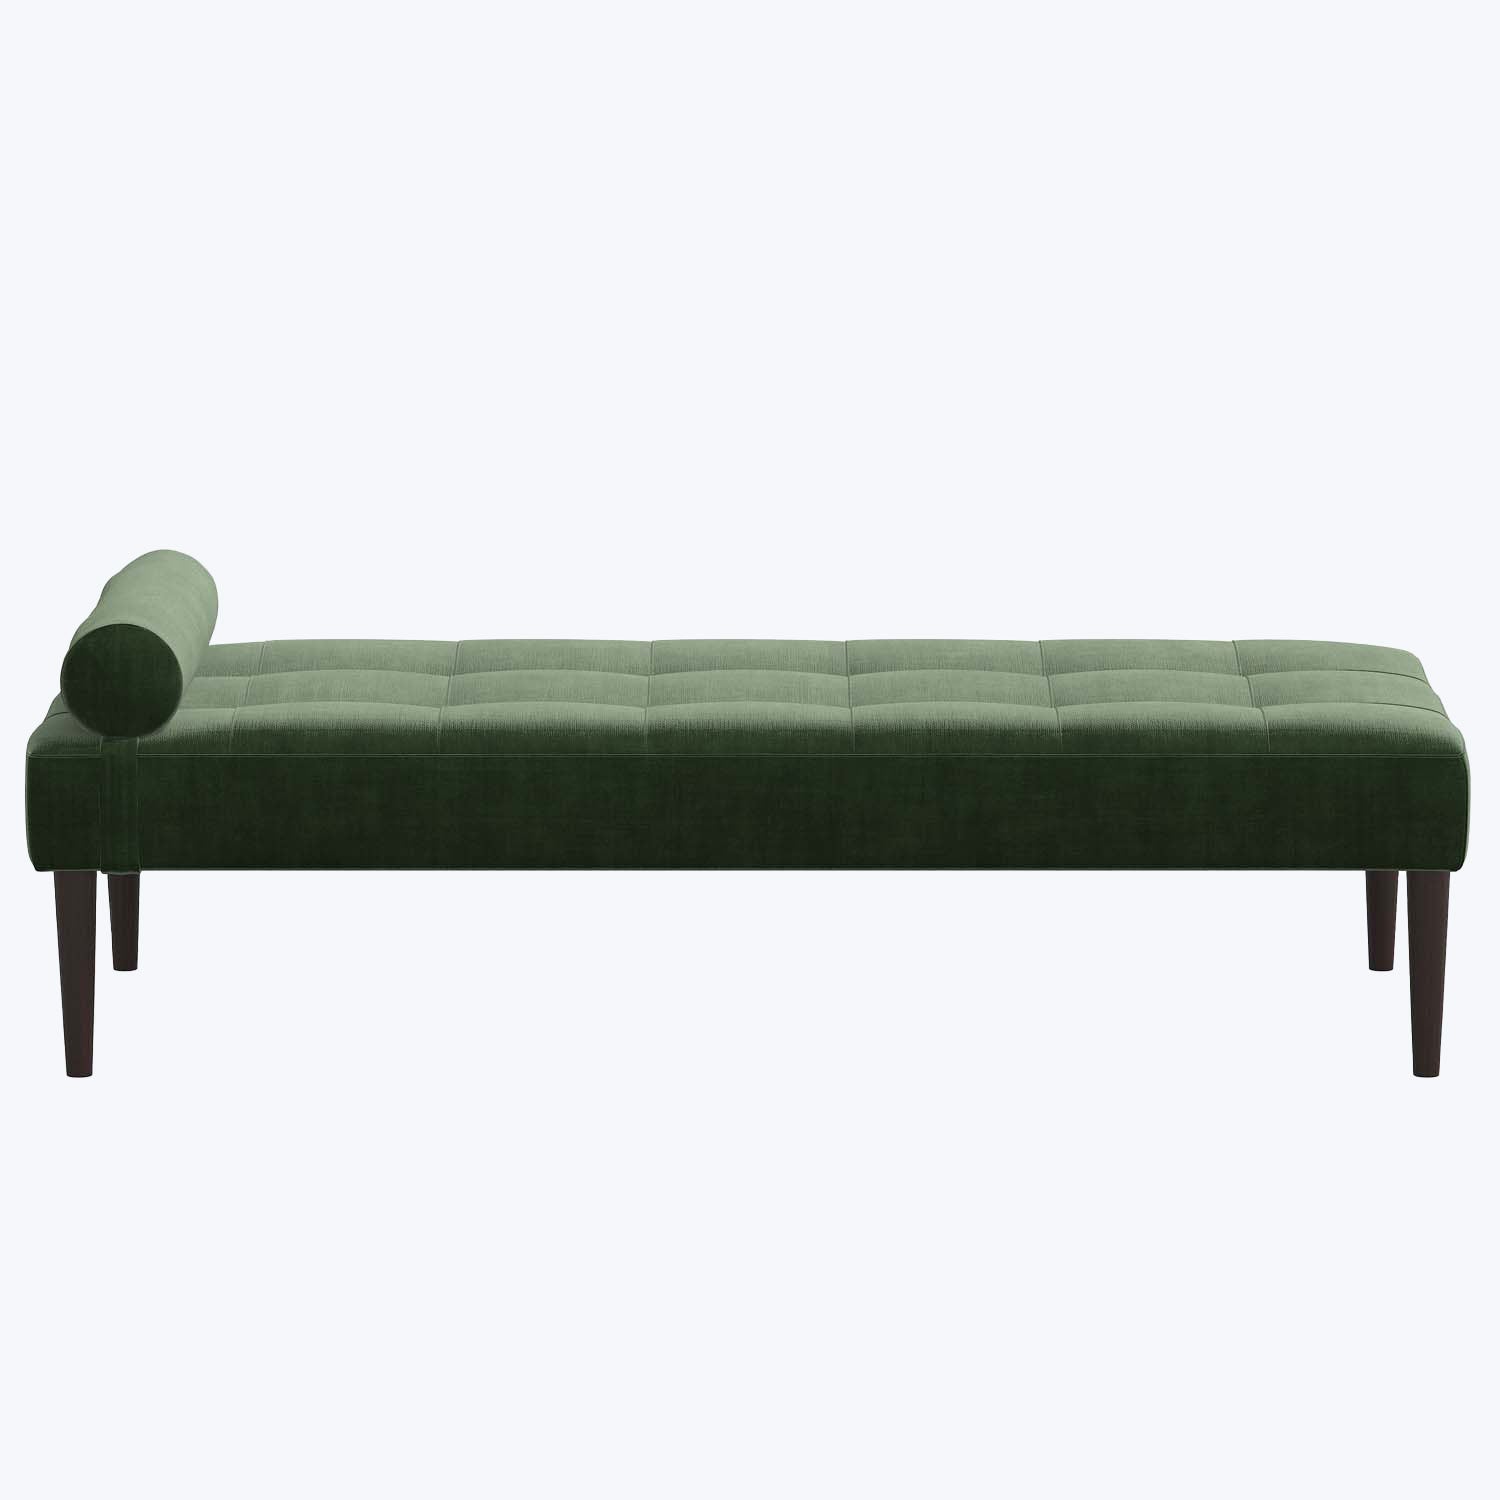 Tufted Daybed